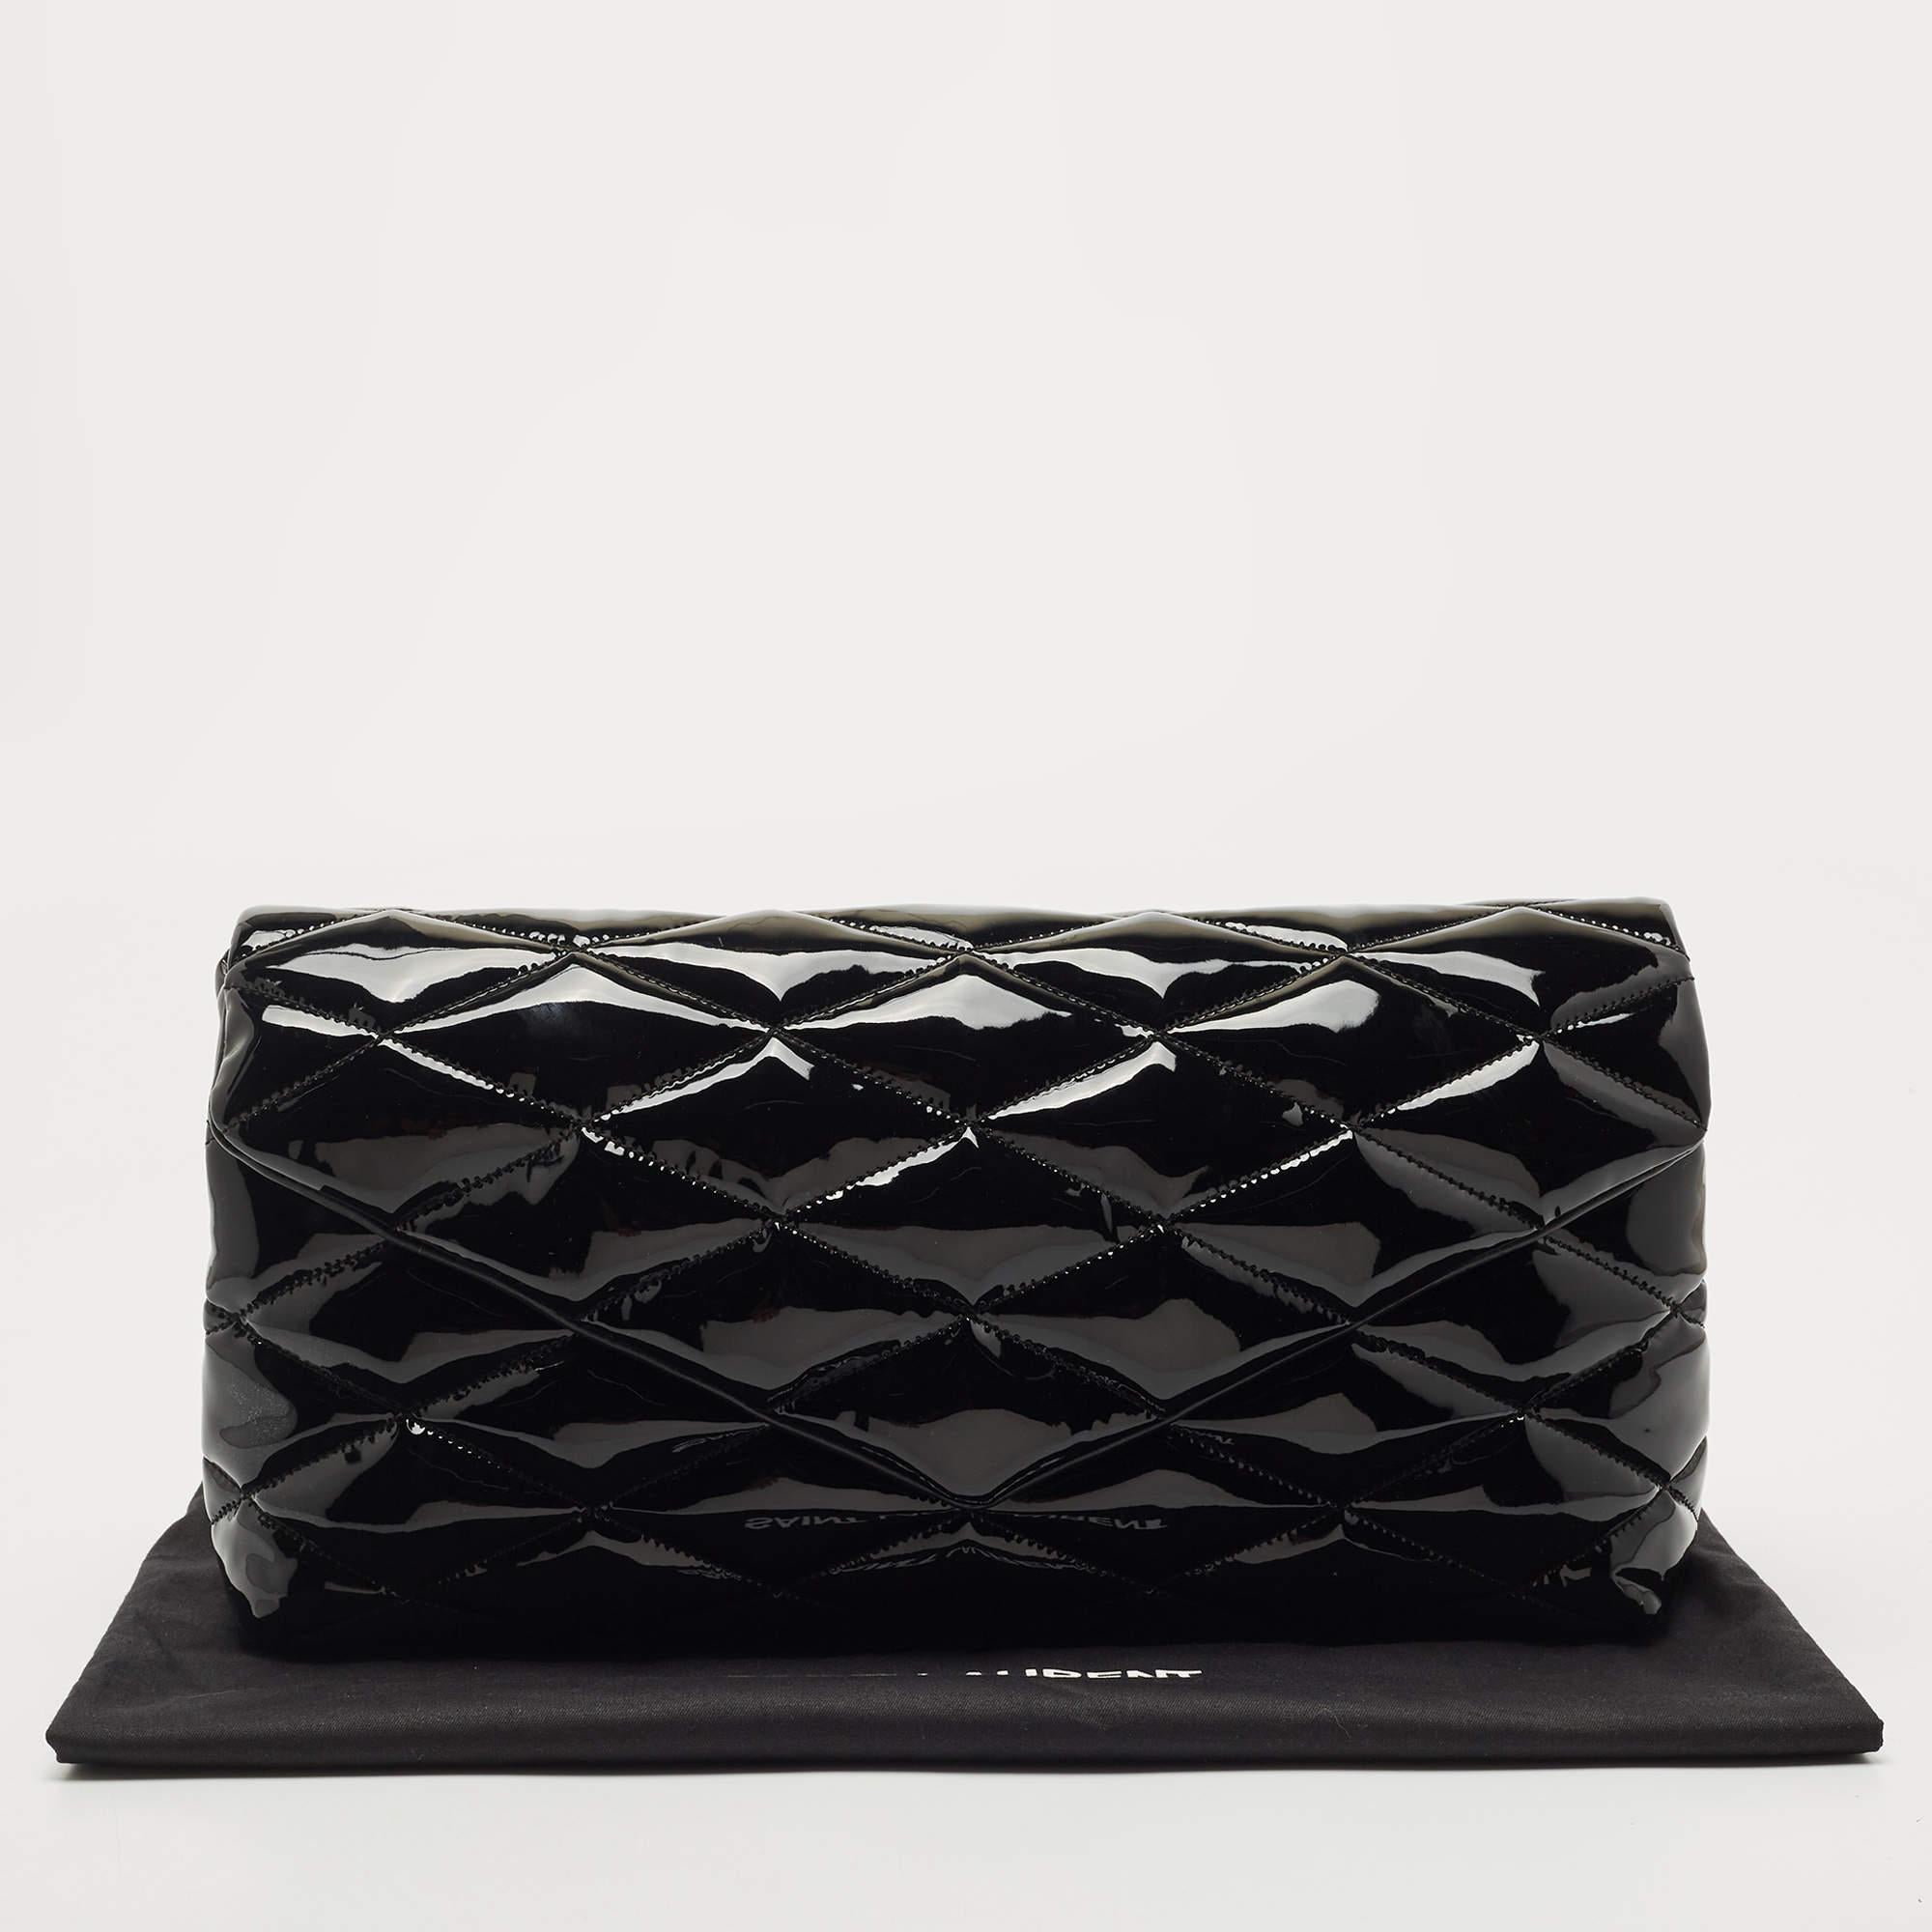 Saint Laurent Black Quilted Patent Leather Sade Puffer Envelope Clutch 8